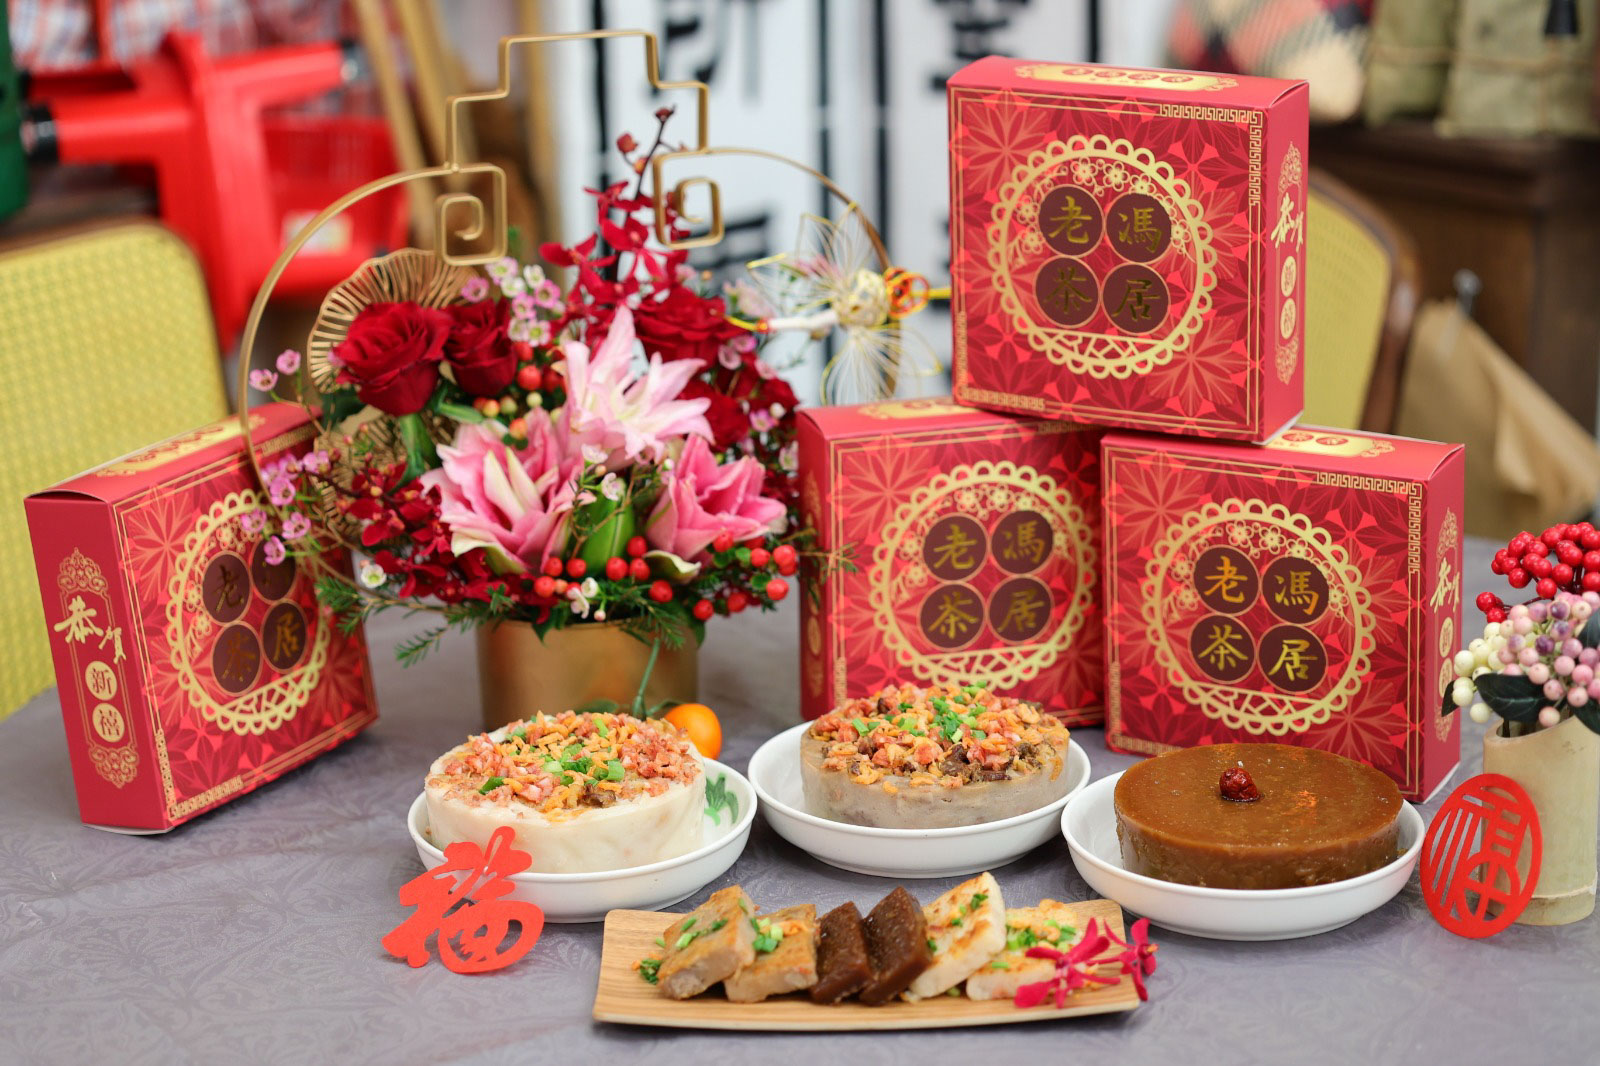 Lunar New Year Puddings have been sold out